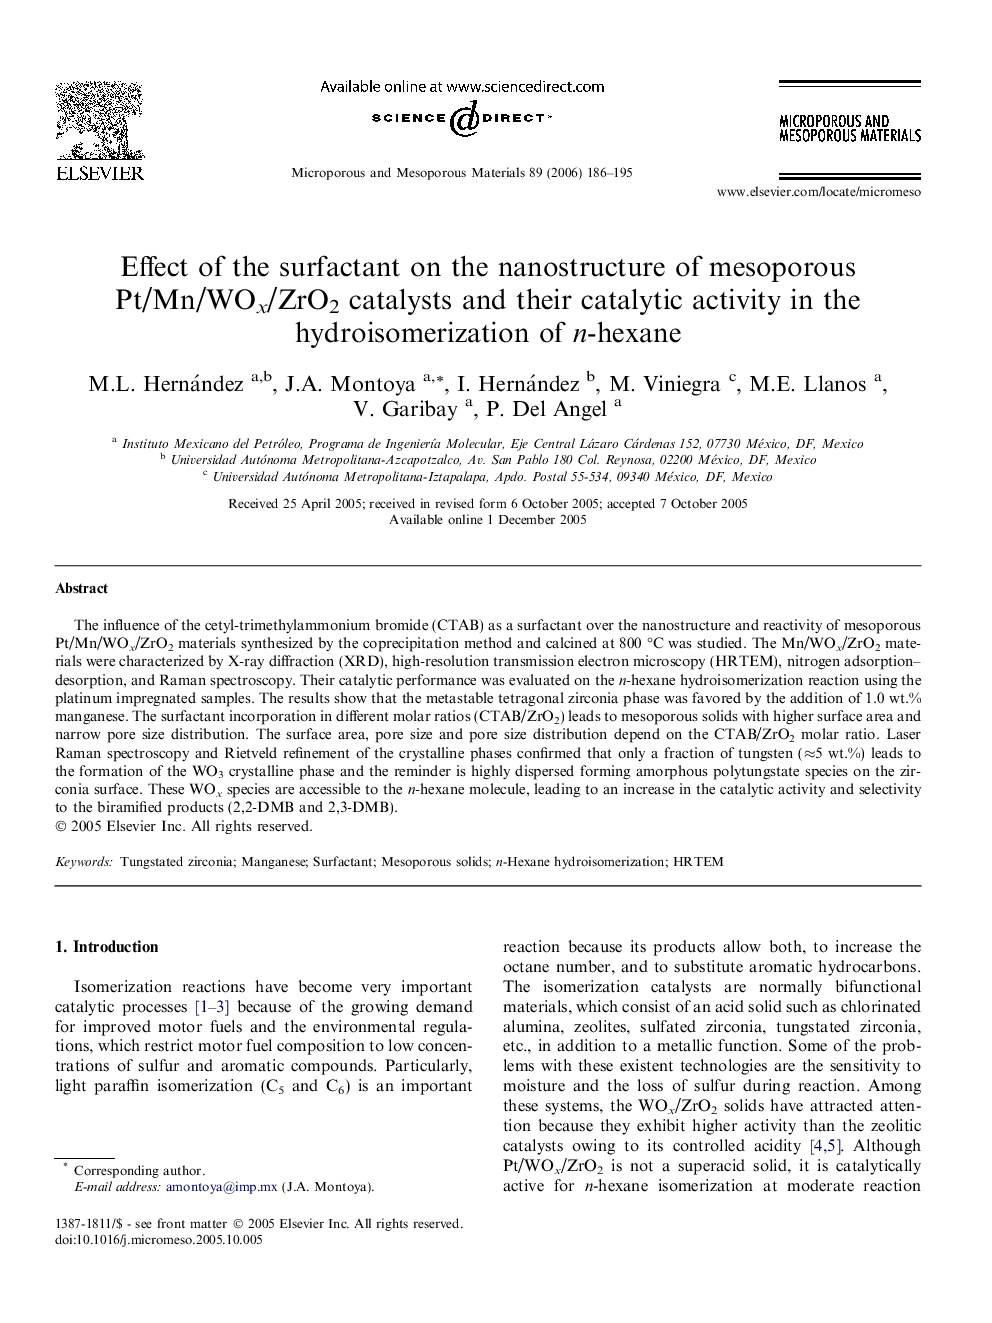 Effect of the surfactant on the nanostructure of mesoporous Pt/Mn/WOx/ZrO2 catalysts and their catalytic activity in the hydroisomerization of n-hexane